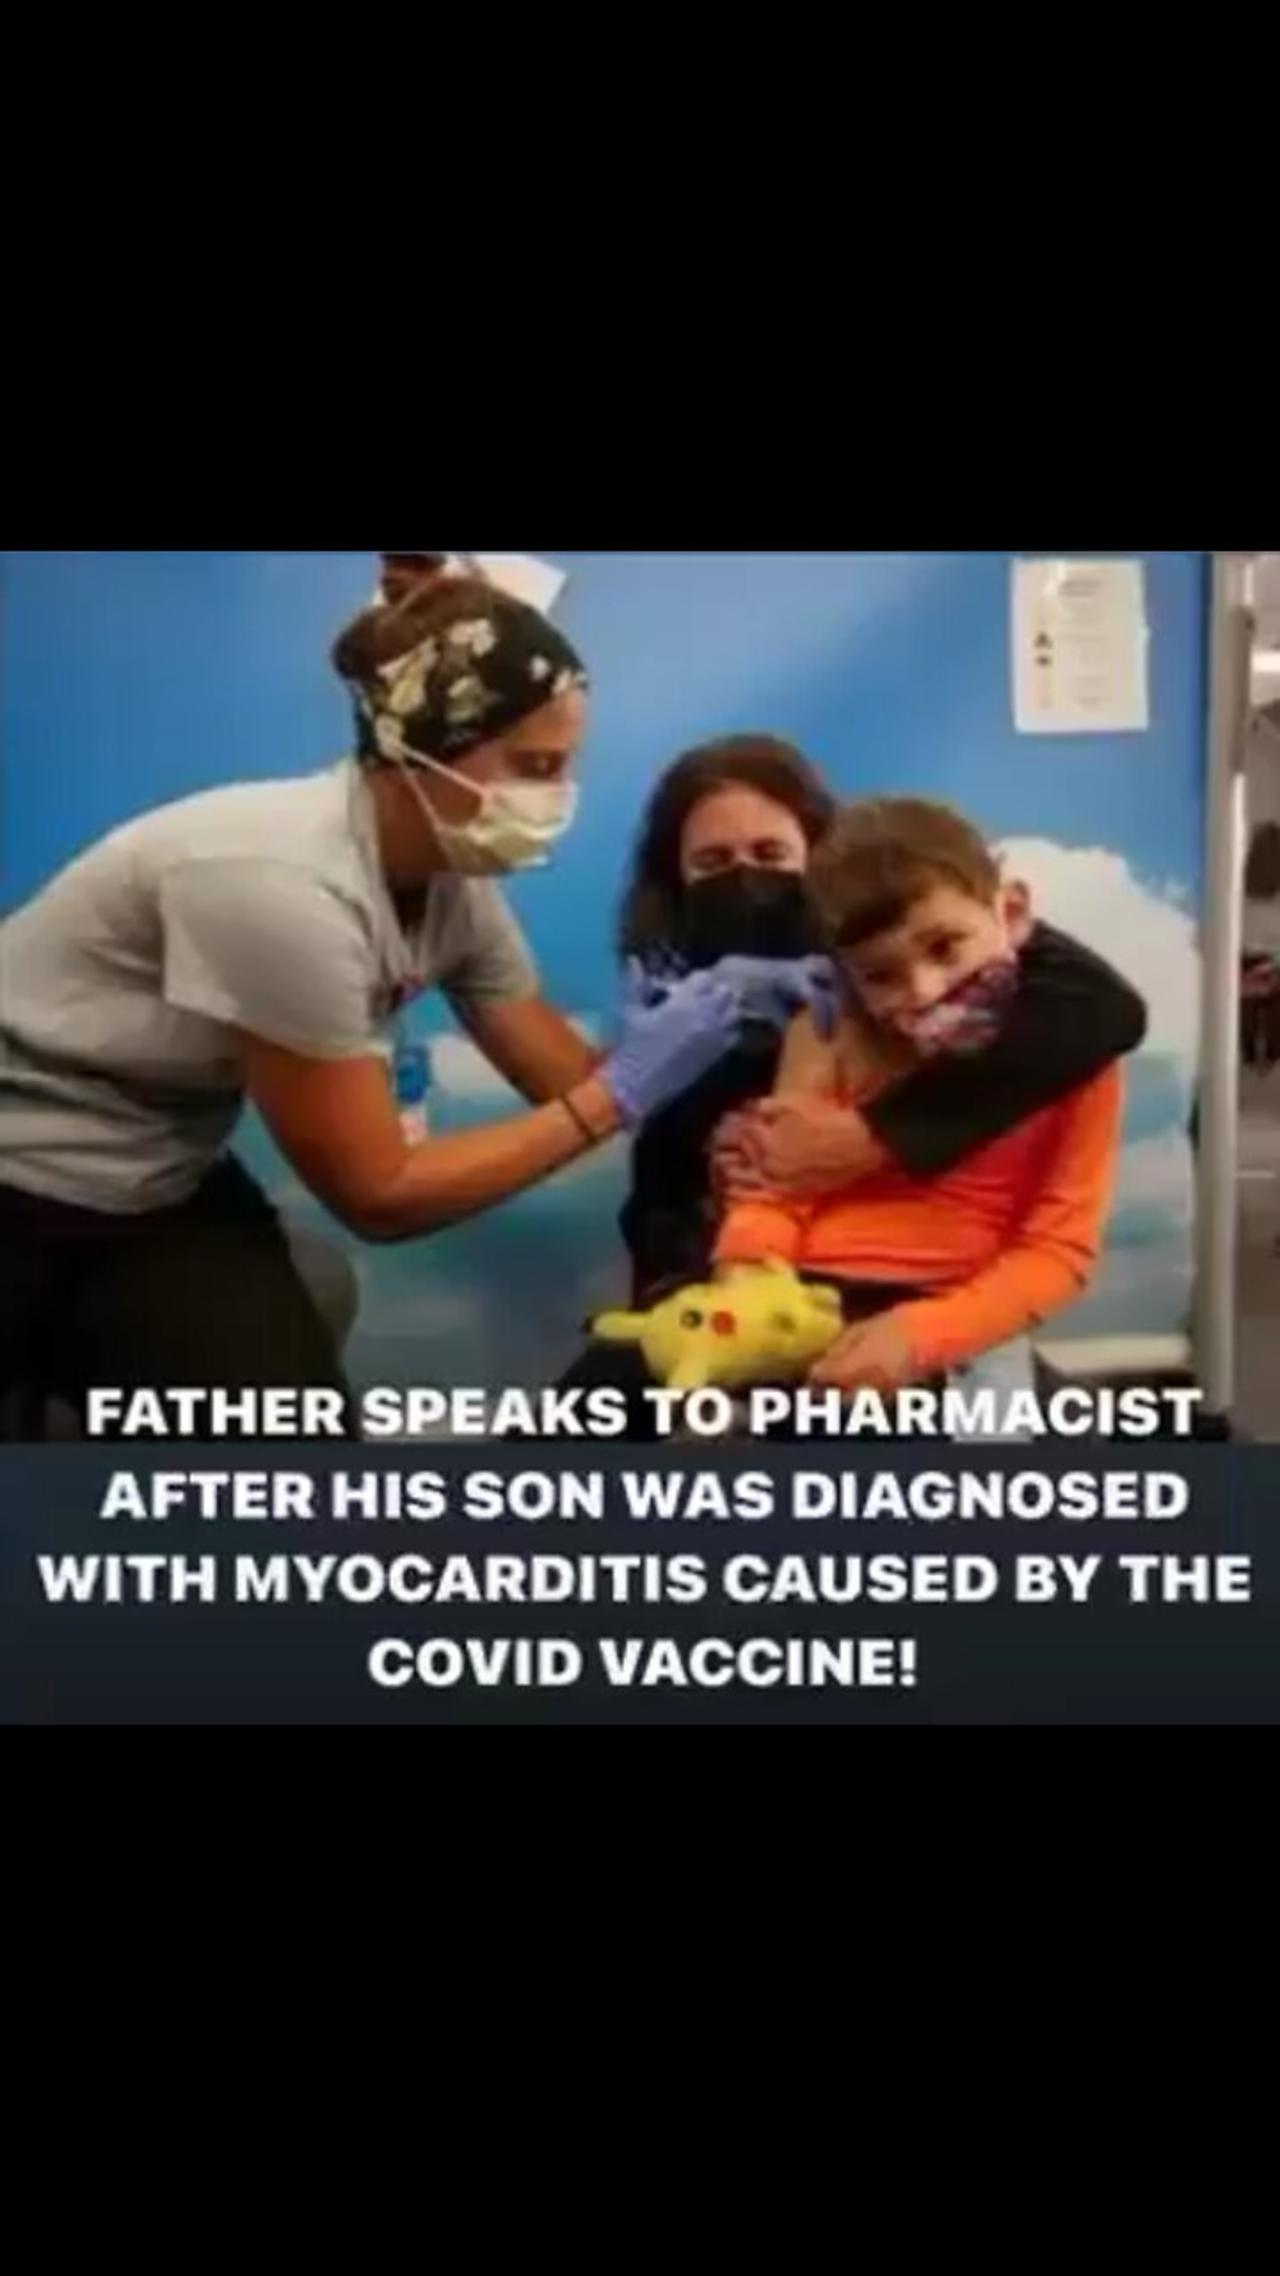 PHARMACIST DIDN’T TELL PARENTS ABOUT COVID VACCINE SIDE EFFECTS